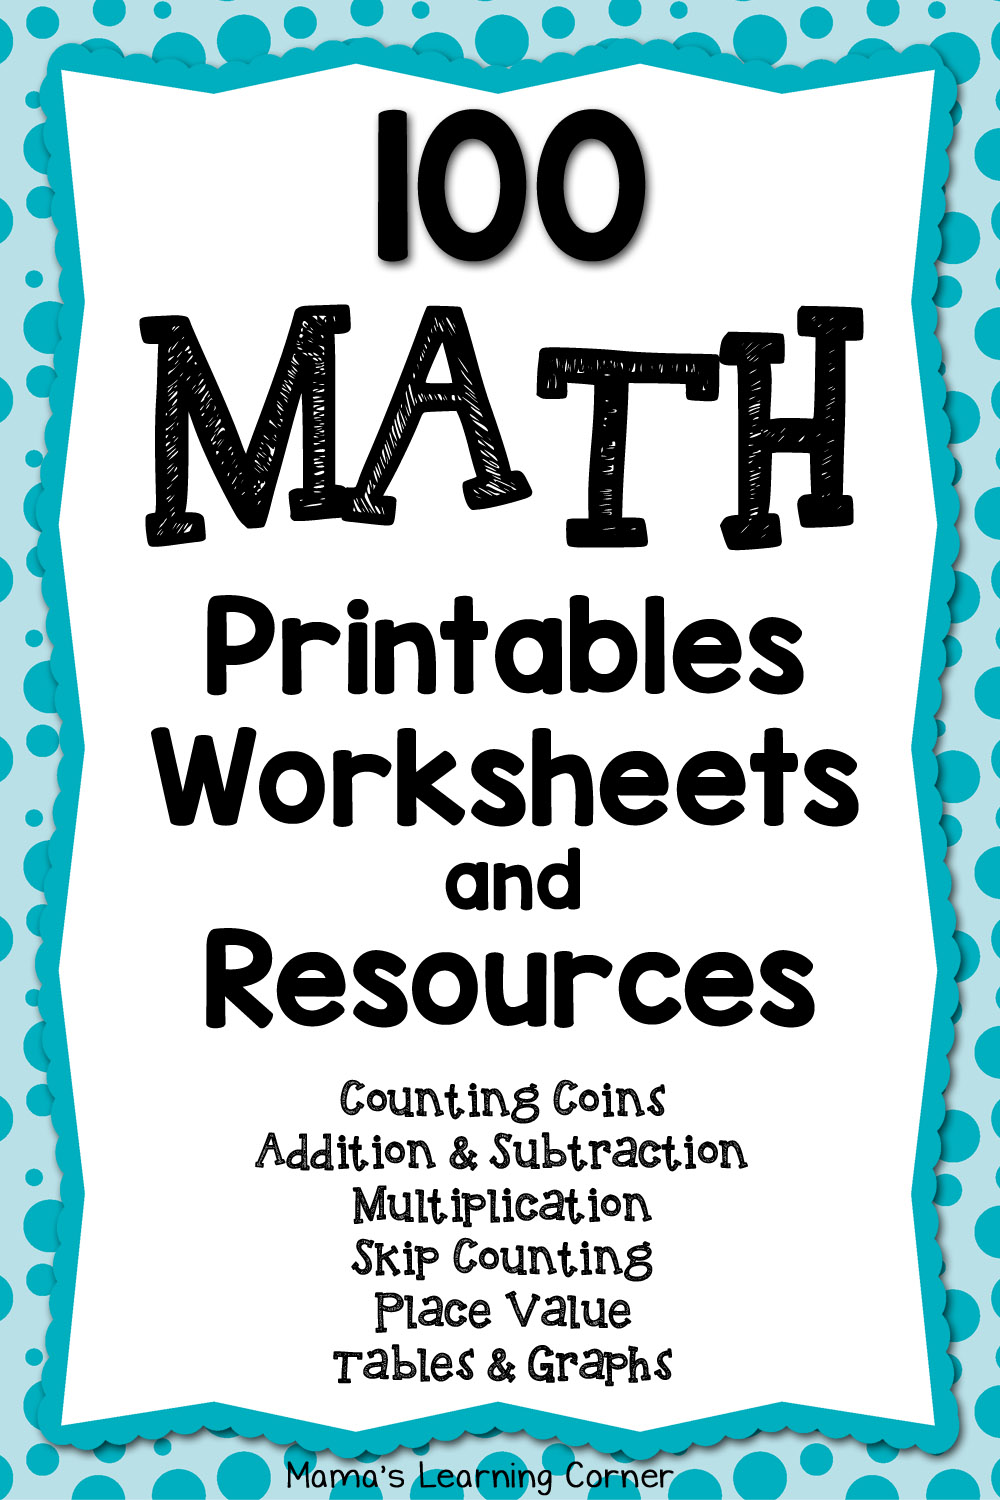 Math Worksheets, Printables, and Resources - over 100 links!